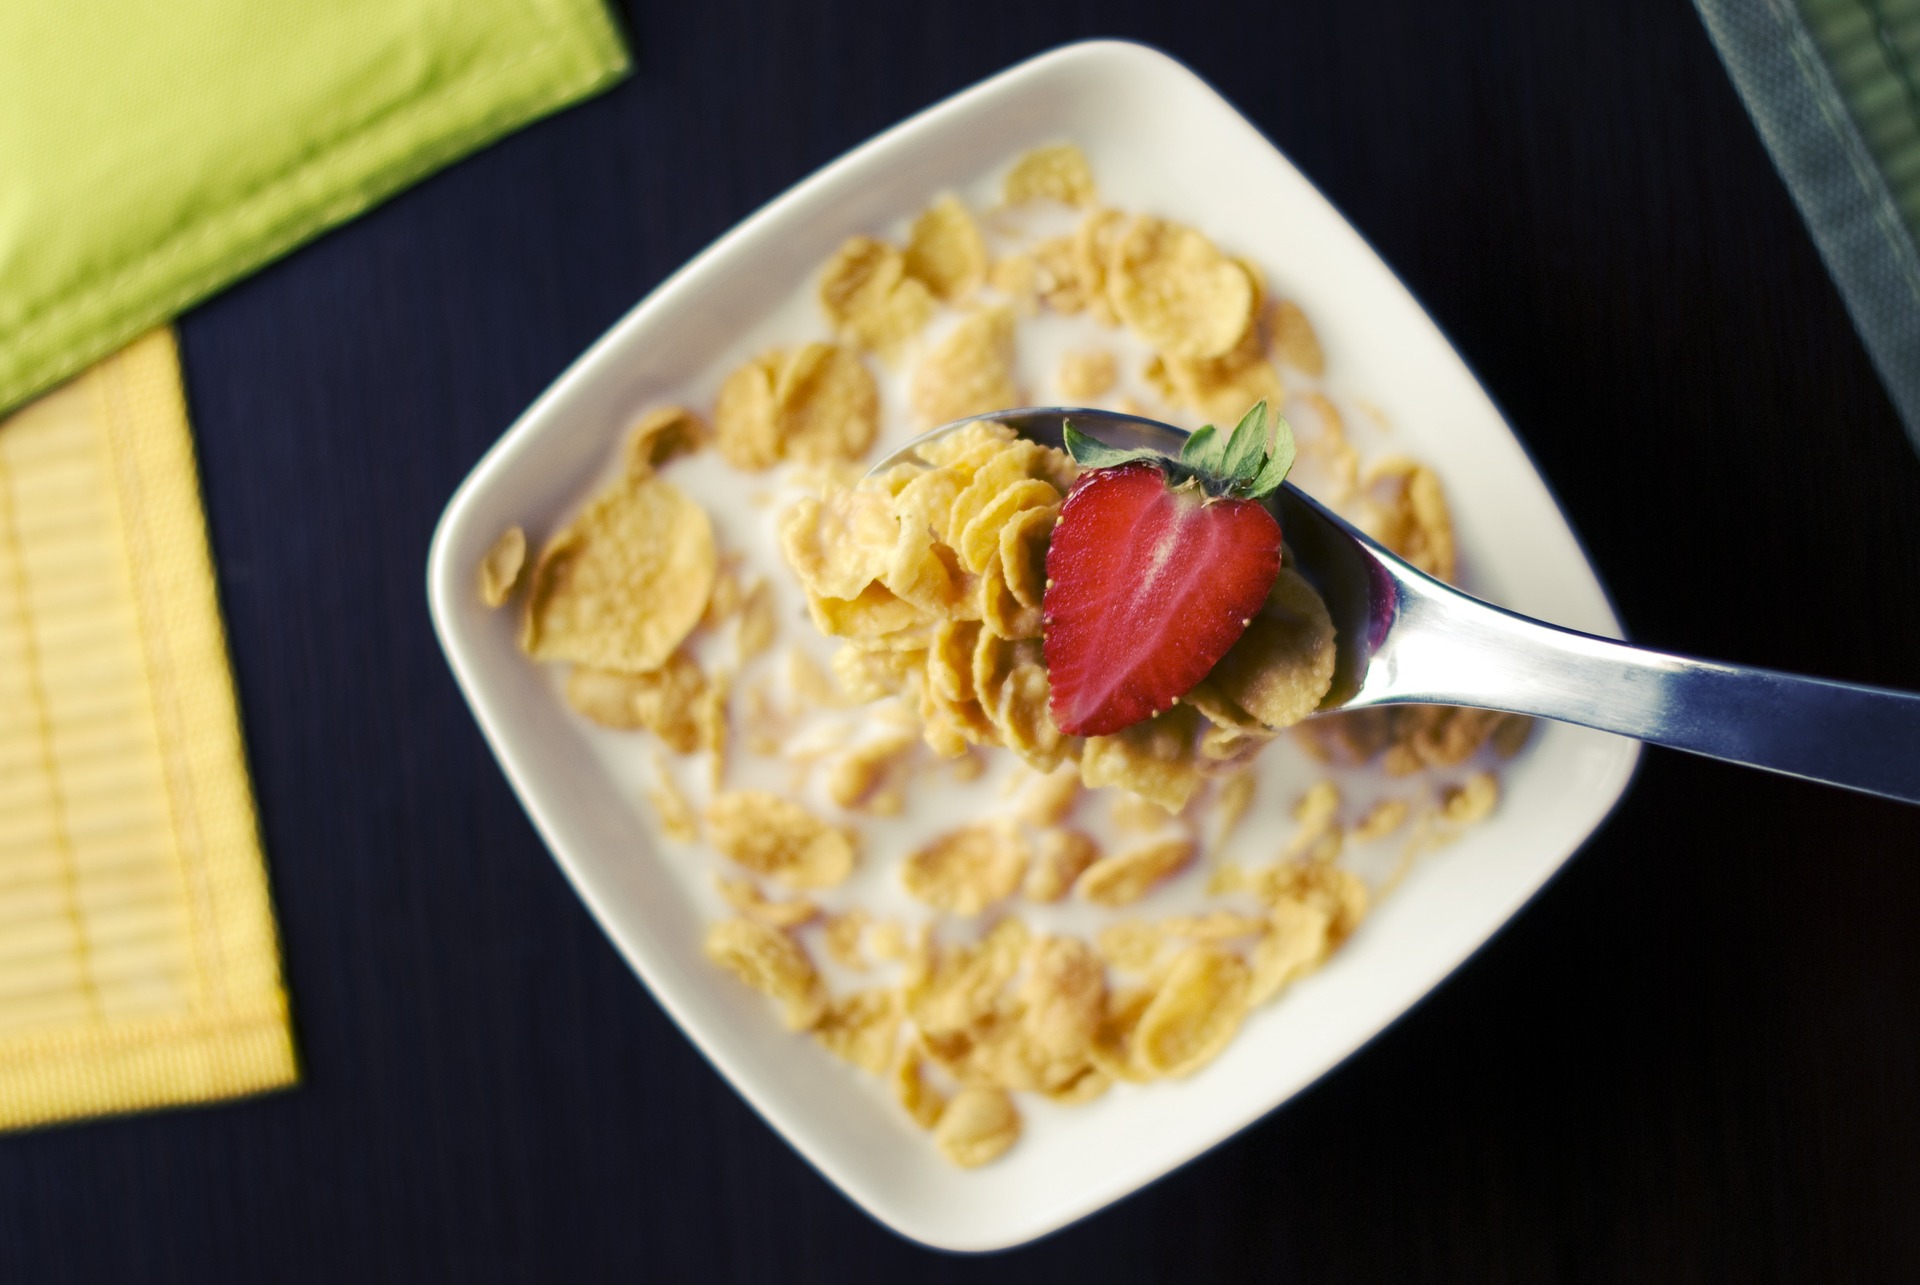 How Do You Eat Your Cereal? A Post on Individuality